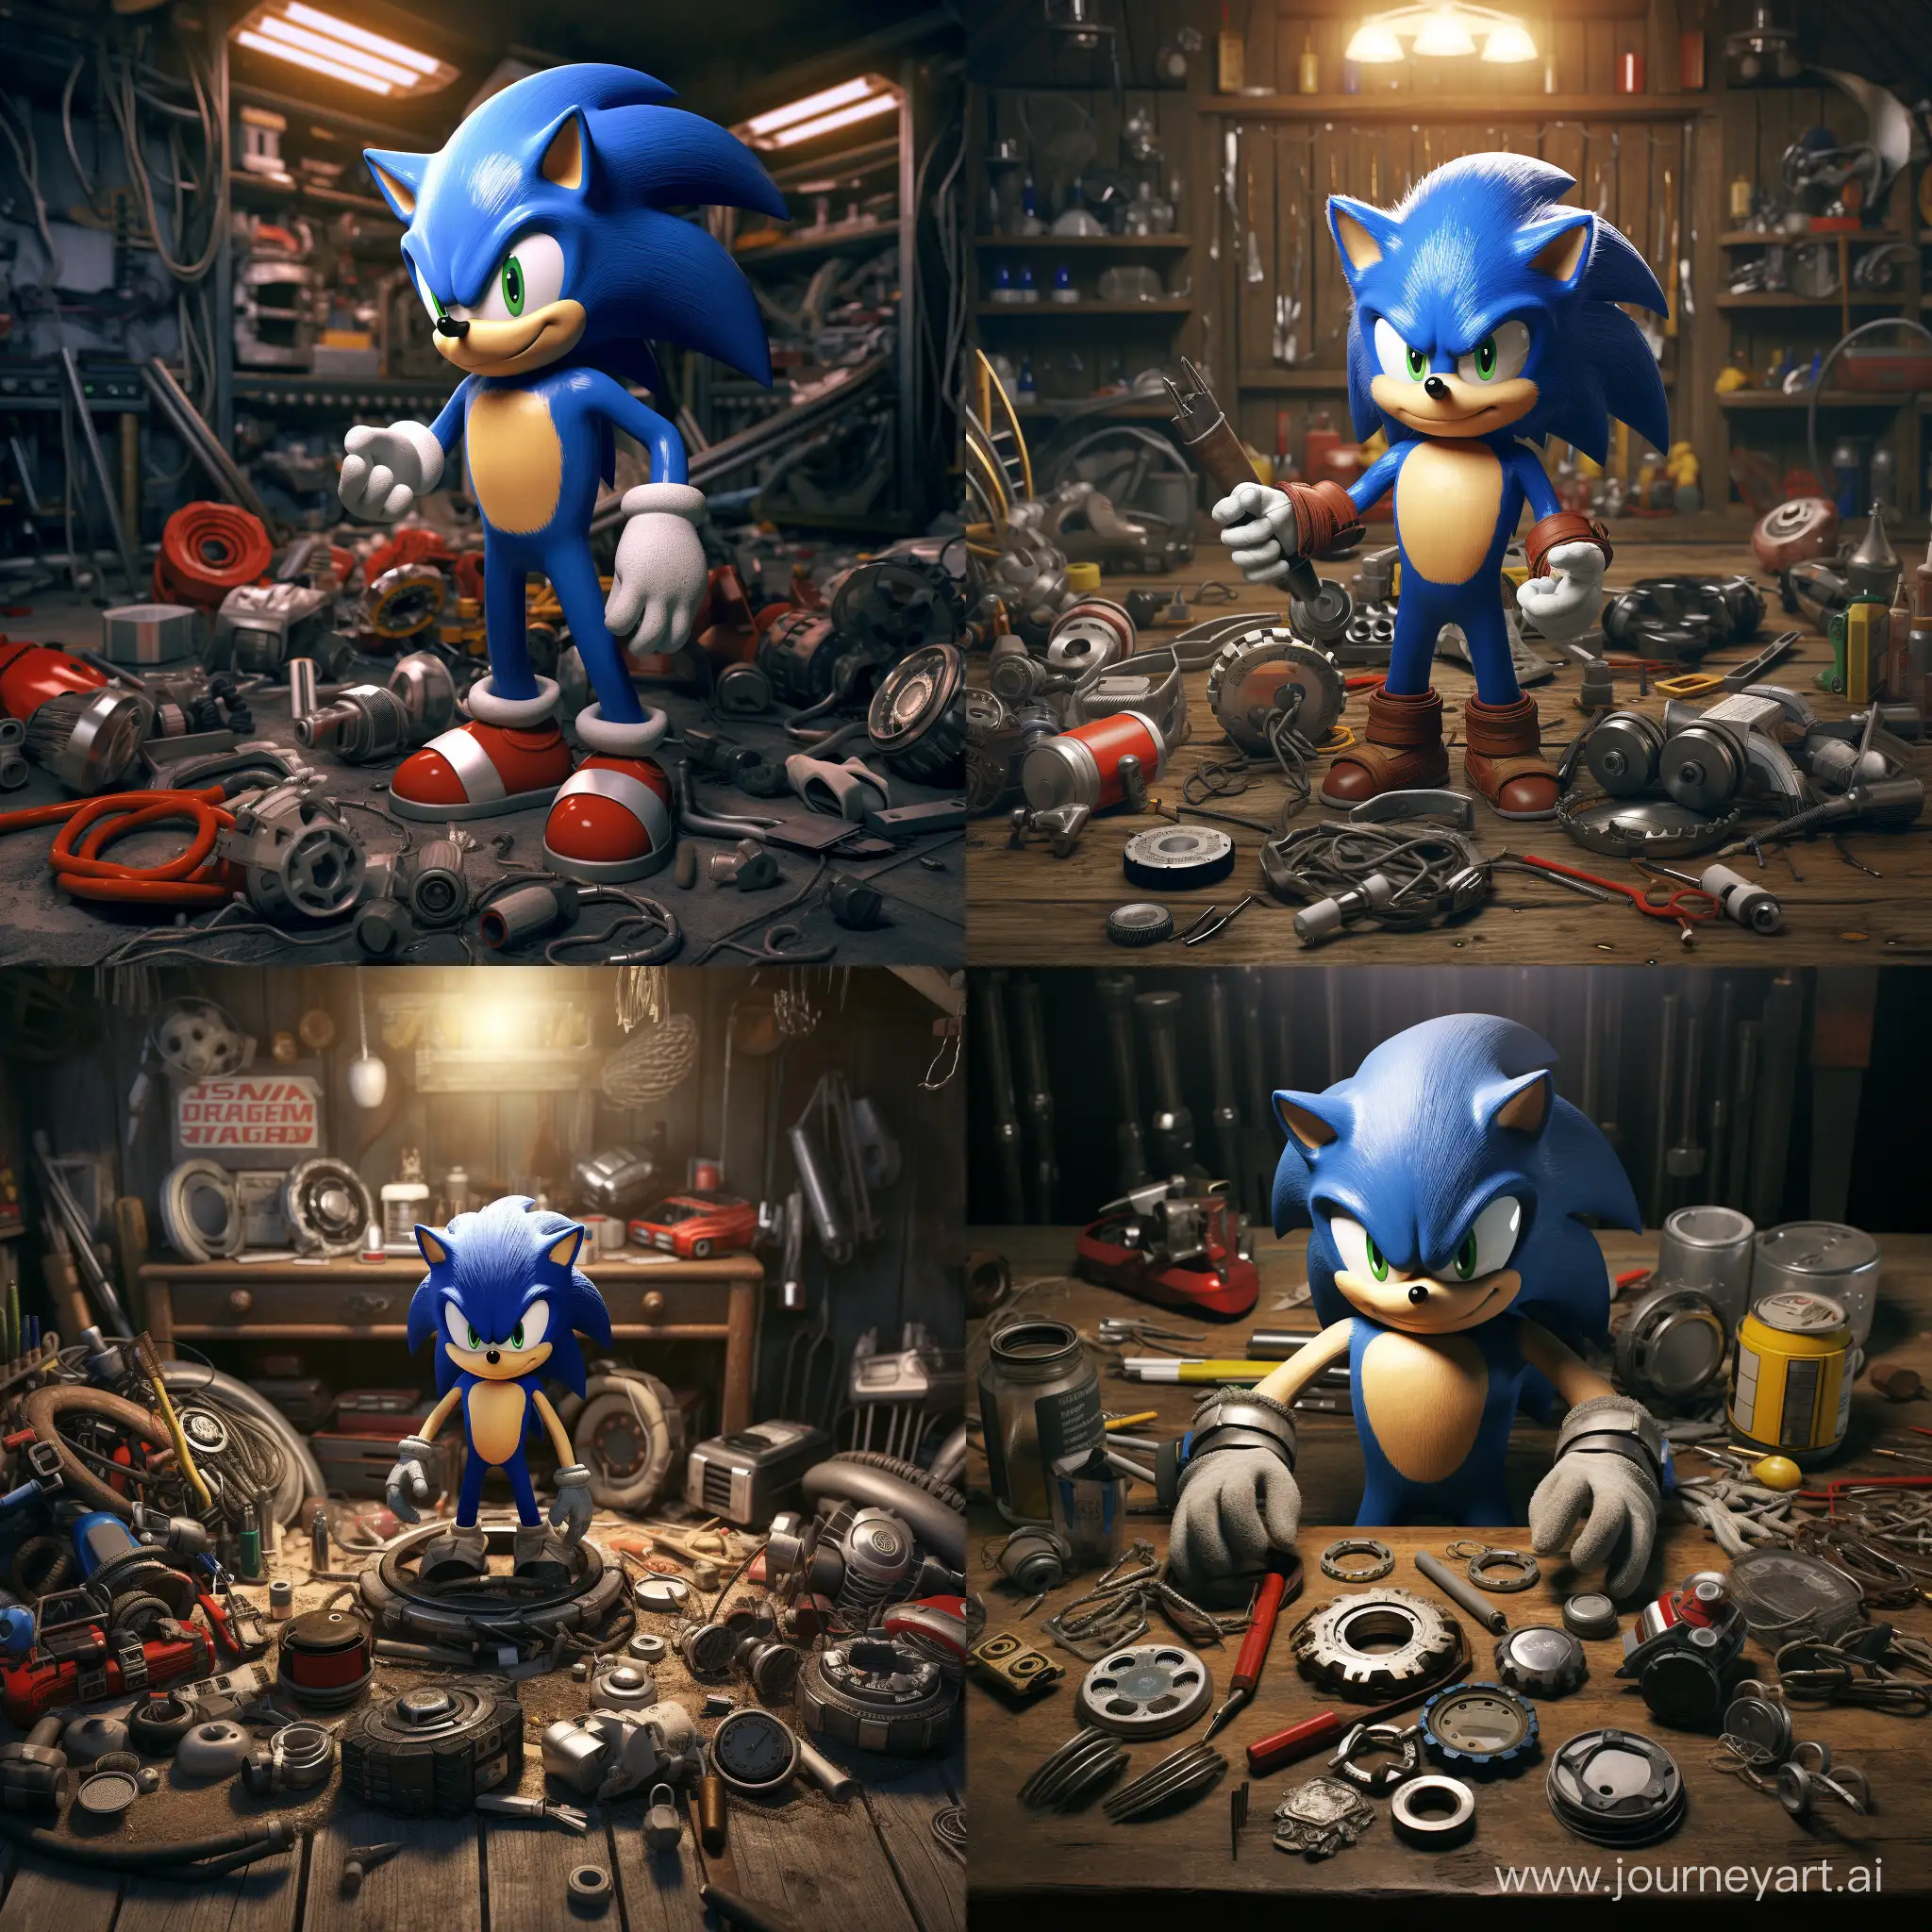 Sonic the hedgehog sells auto spare parts. 